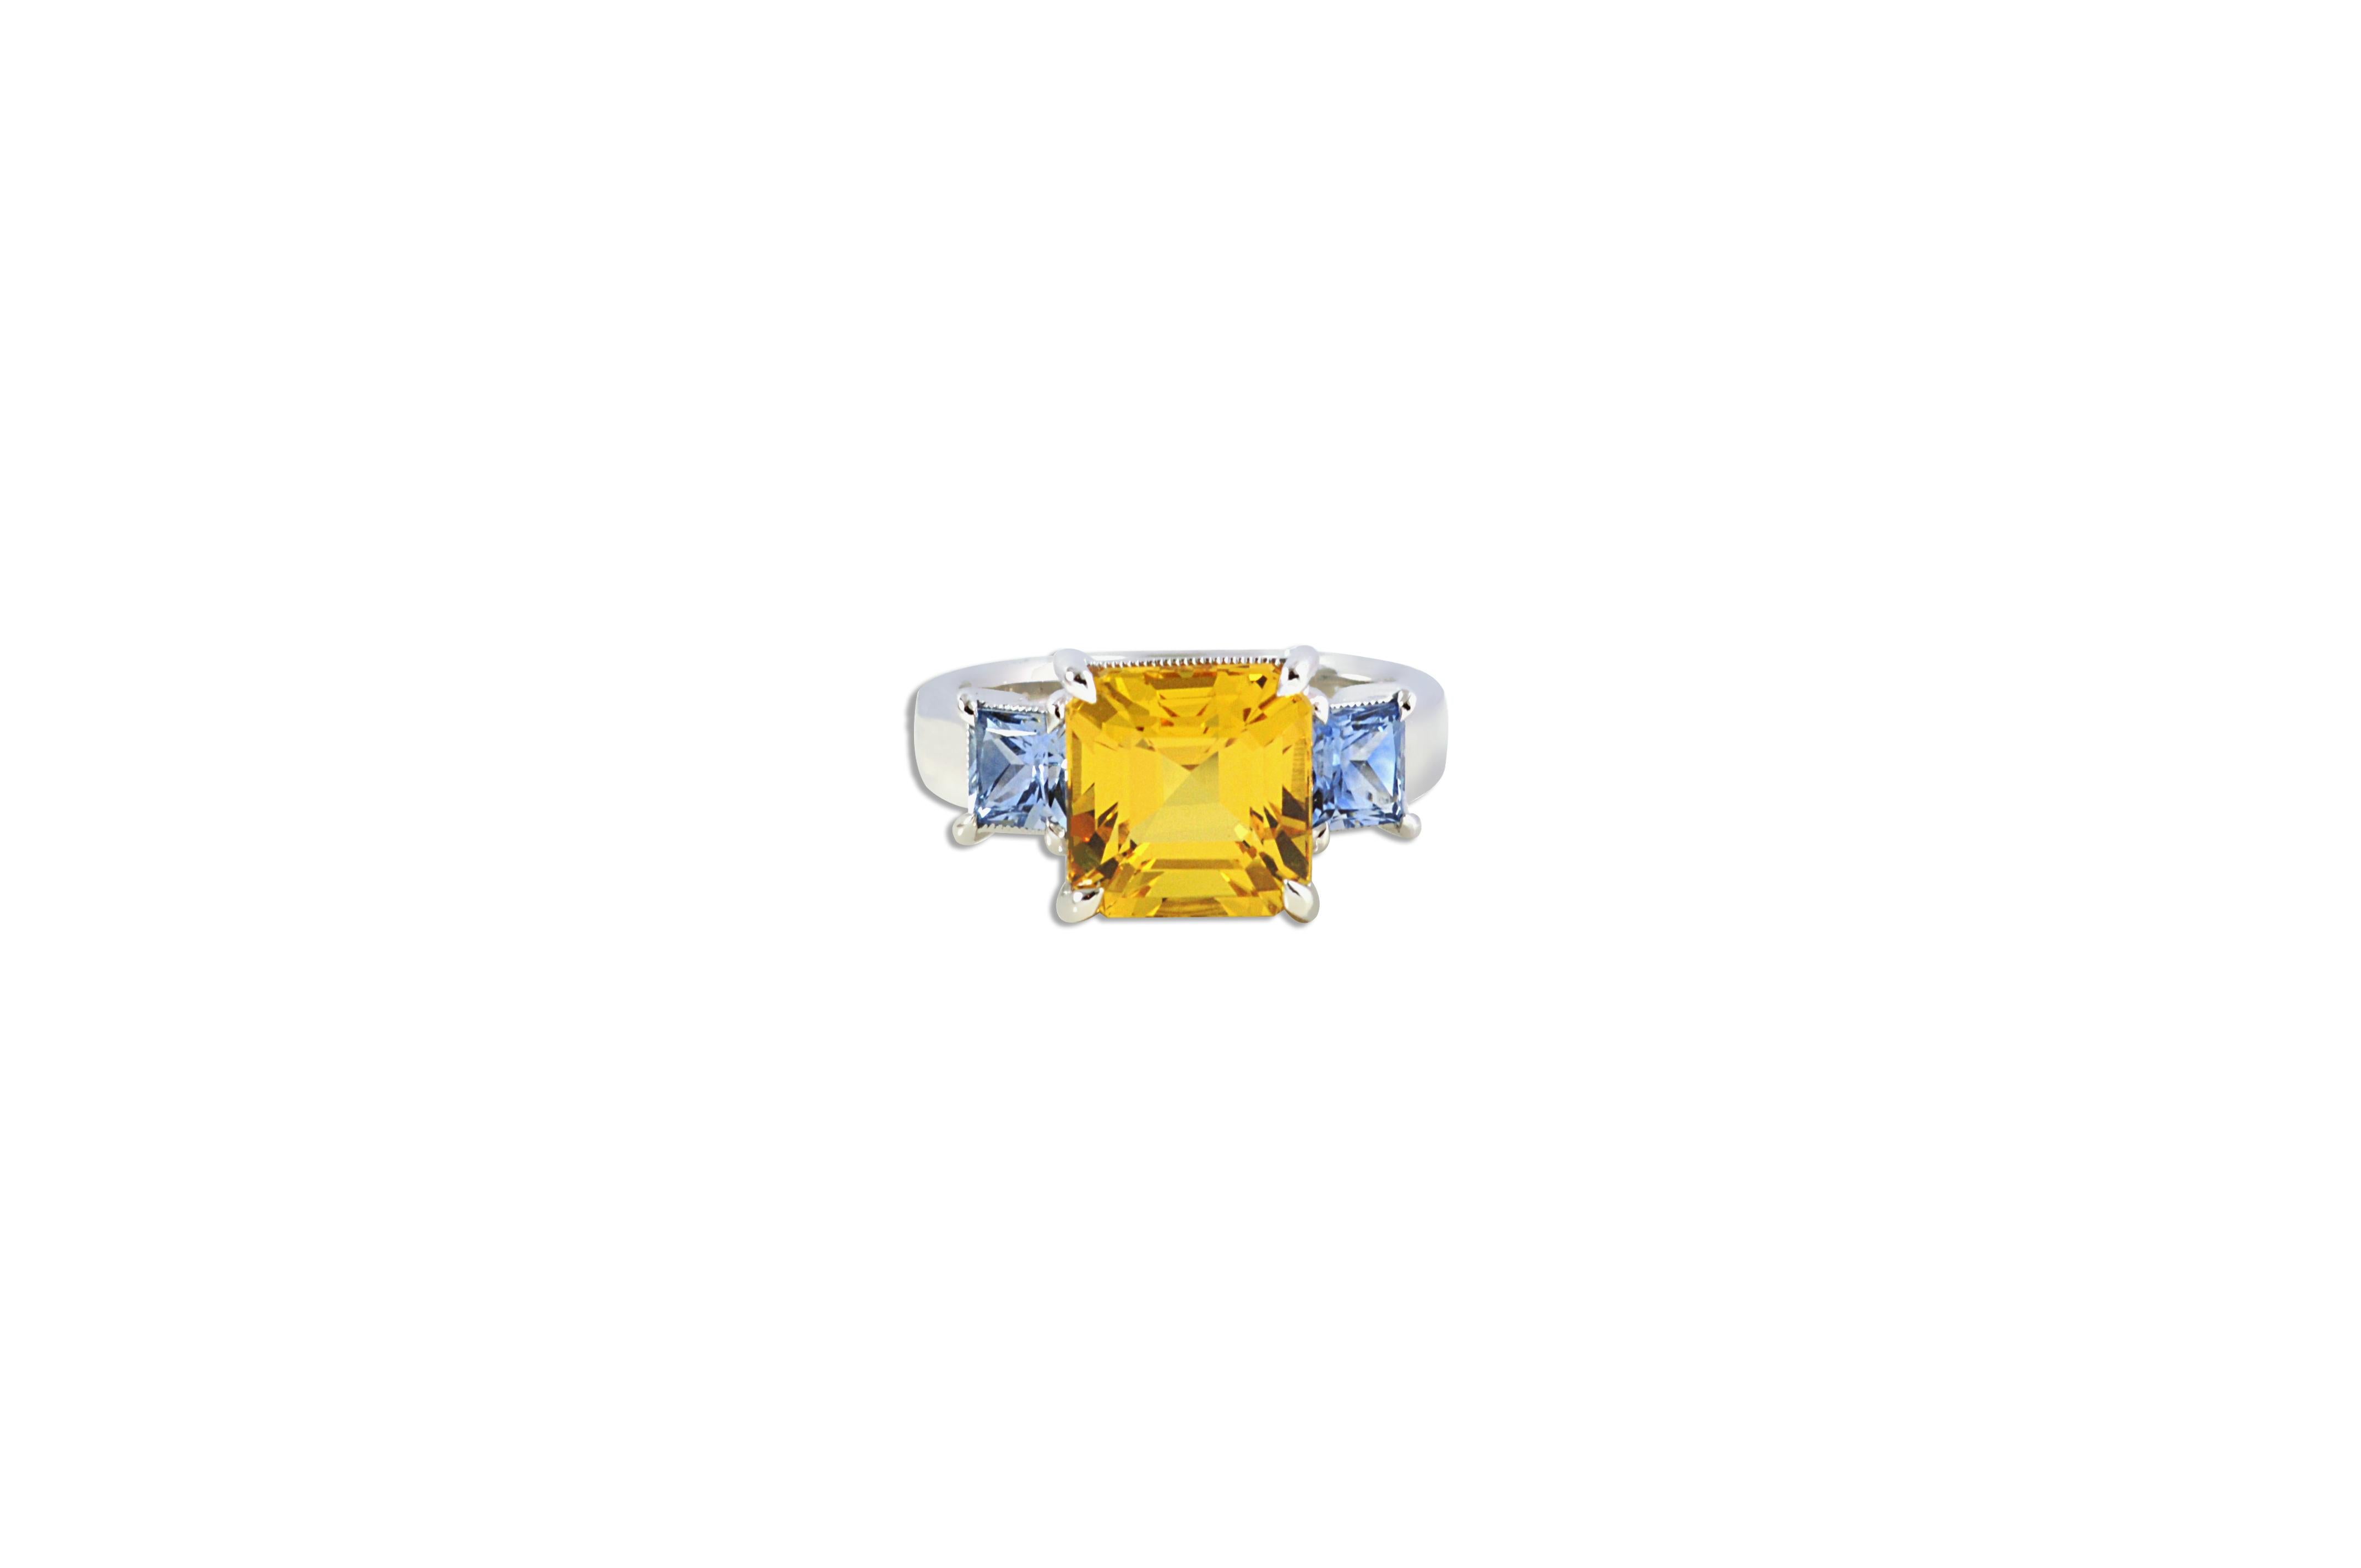 Yellow Sapphire 5.32 carat with Blue Sapphire 1.14 carat Ring Set in 18 Karat White Gold Settings 


Width: 2 cm
Length: 1 cm
Ring Size: 50
Total Weight: 7.74 grams

